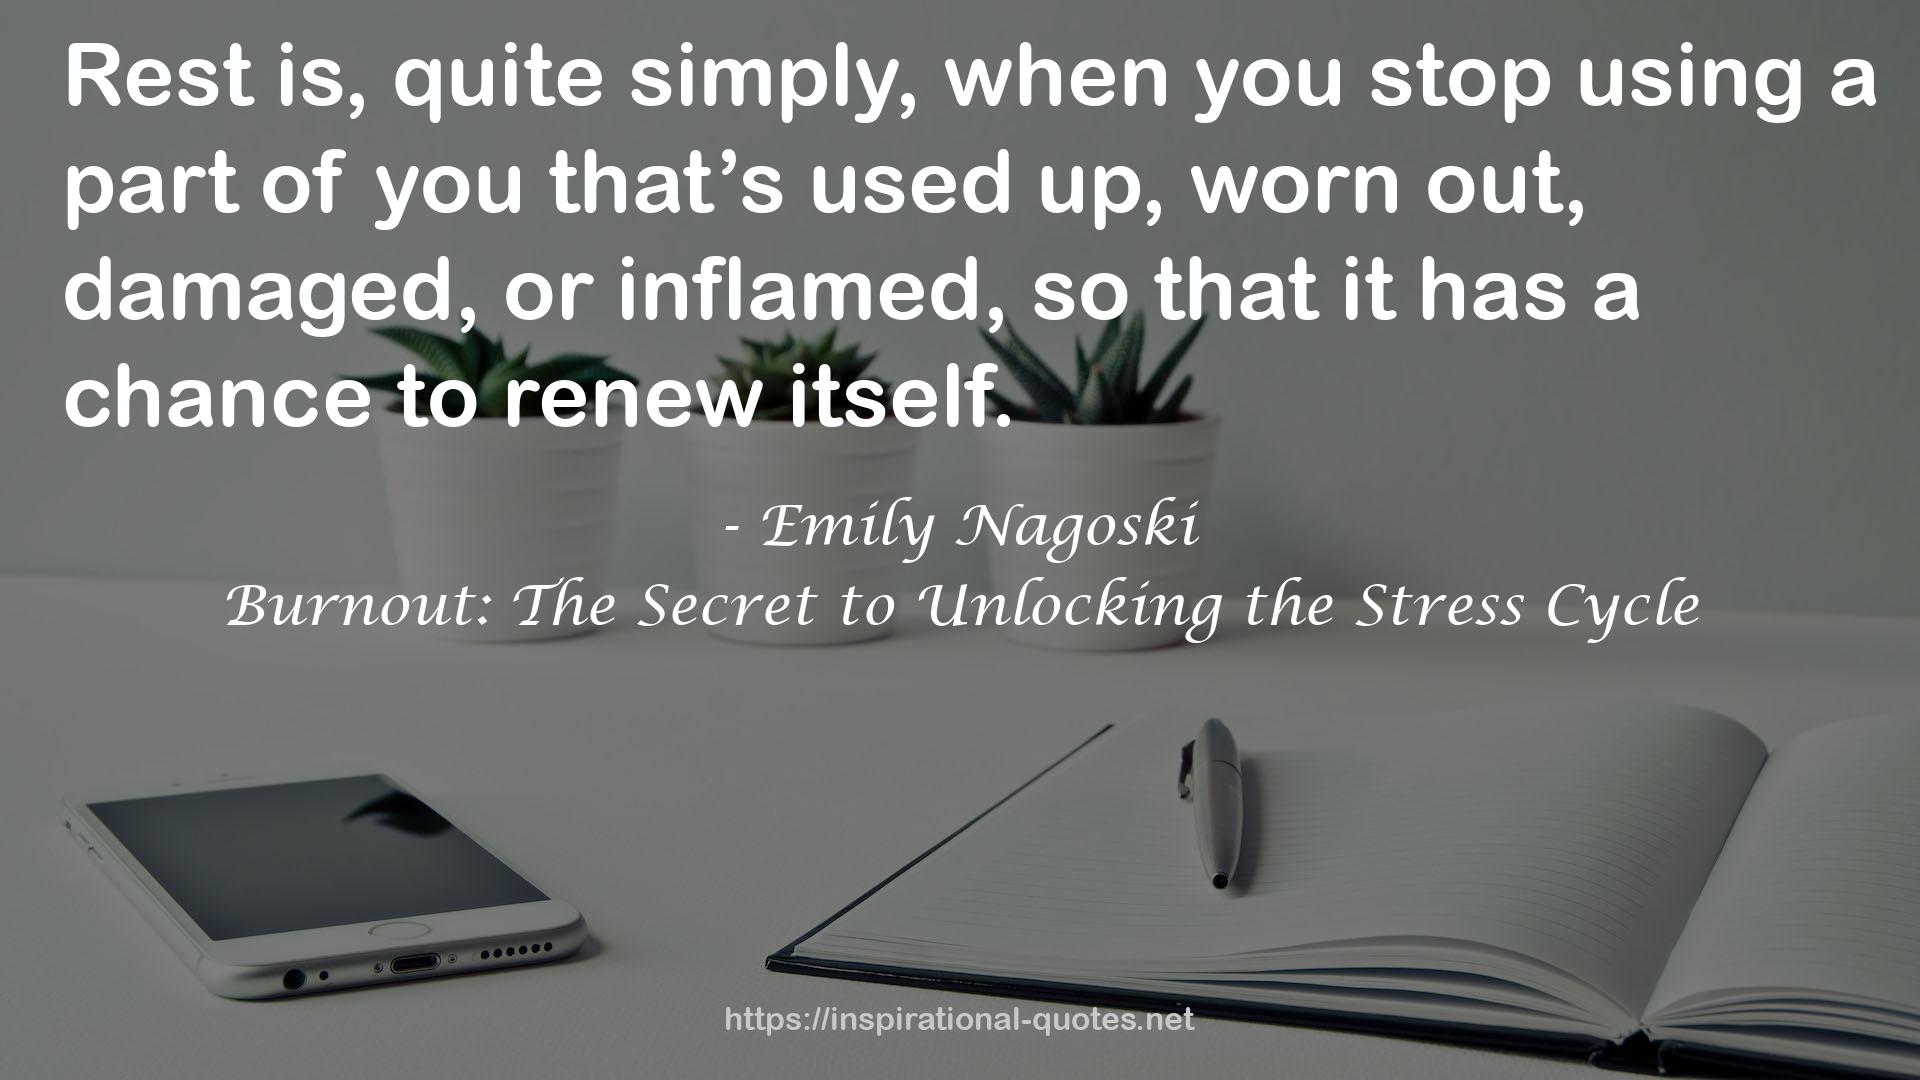 Burnout: The Secret to Unlocking the Stress Cycle QUOTES